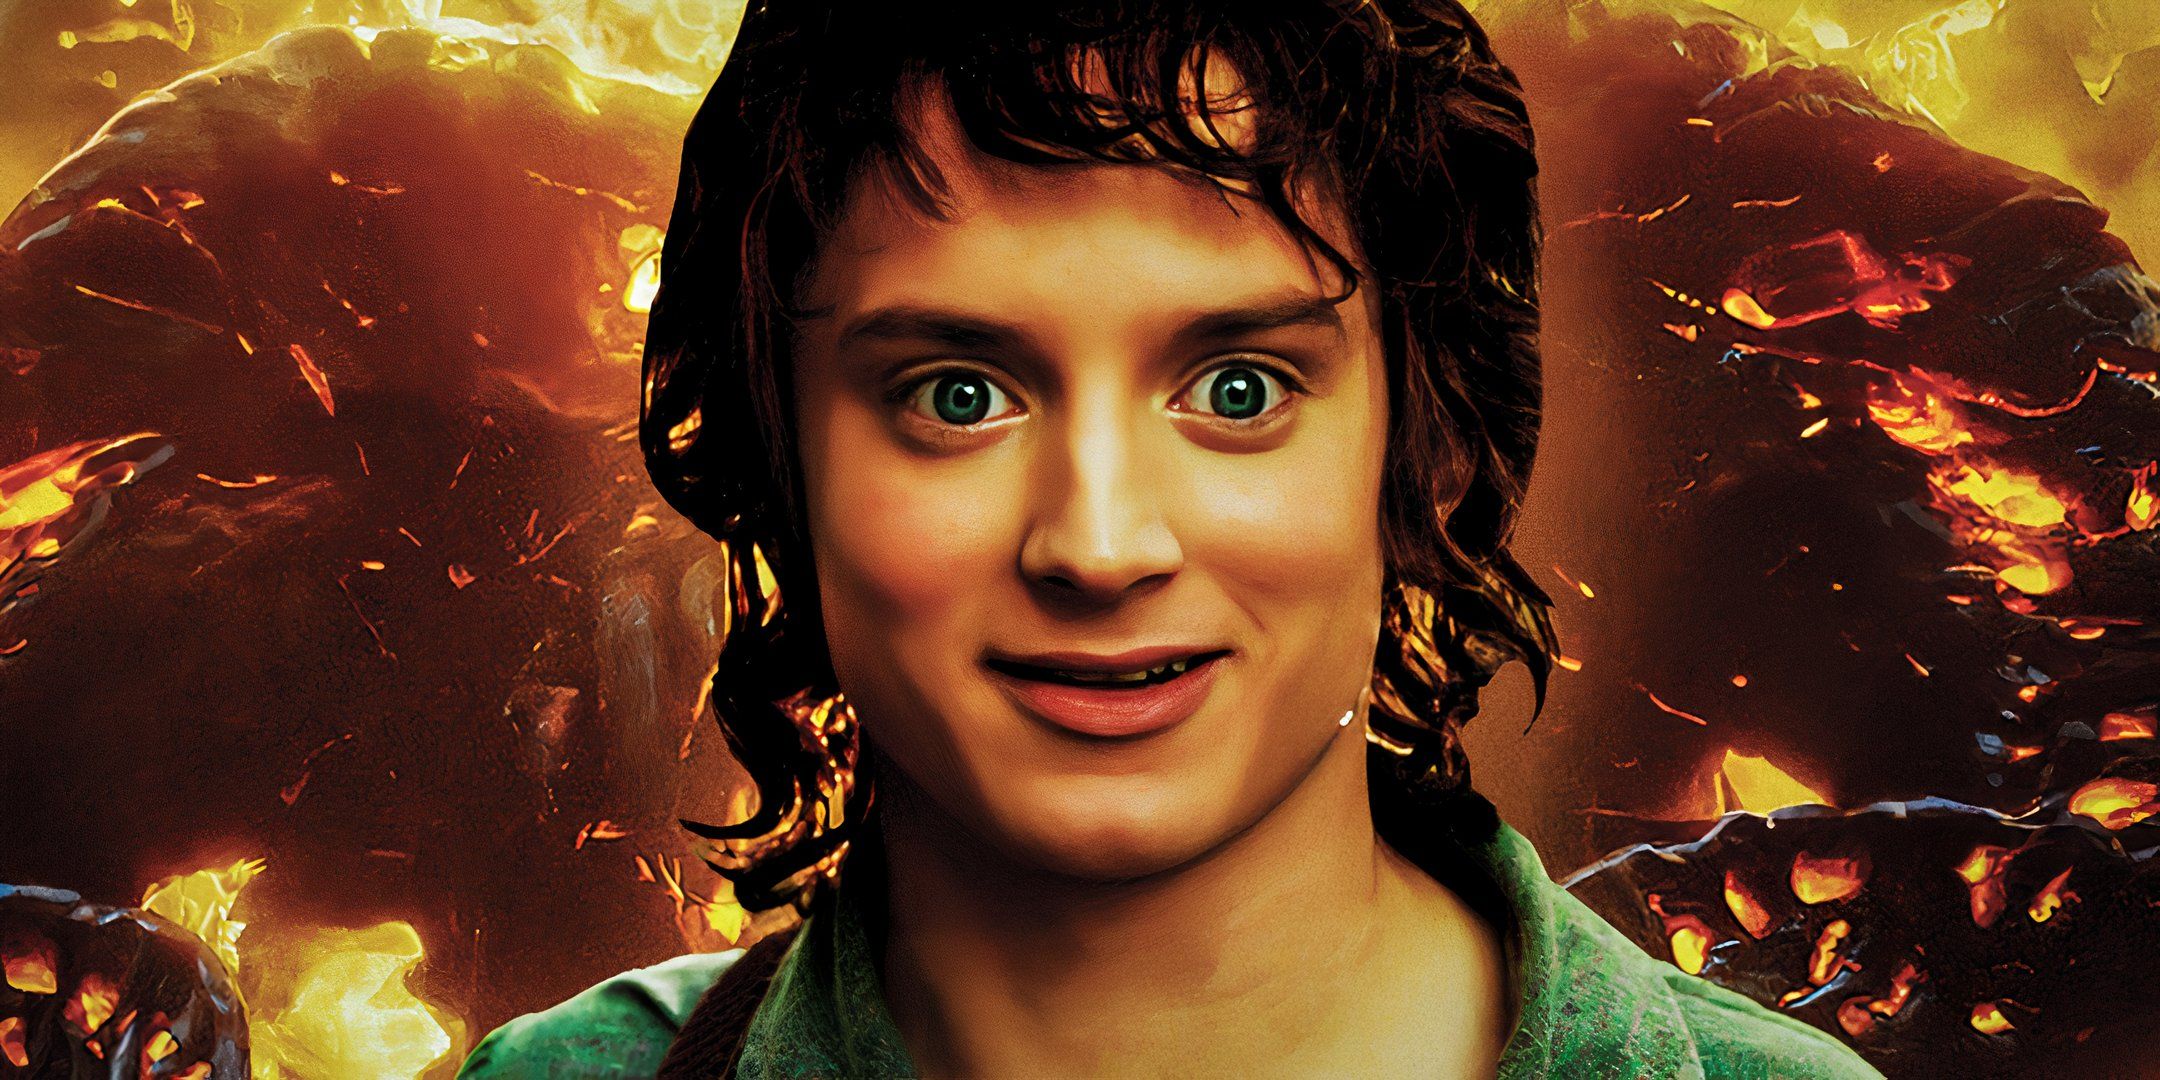 Elijah Wood smiling as Frodo from The Lord of the Rings: The Fellowship of the Ring (2001) on a fiery background